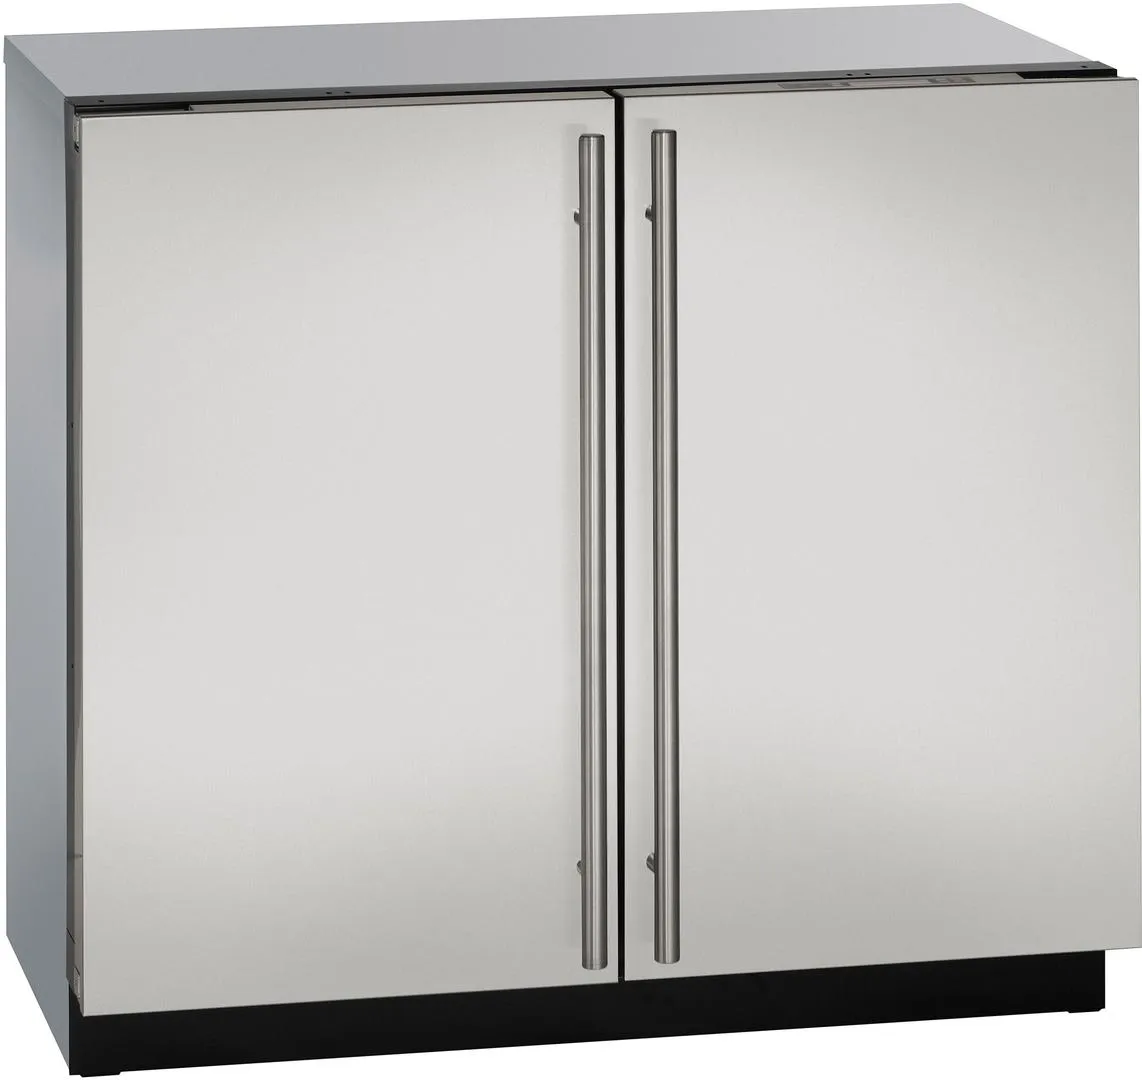 Front view of the Danby DAR110A3LDB apartment-sized freezerless refrigerator 